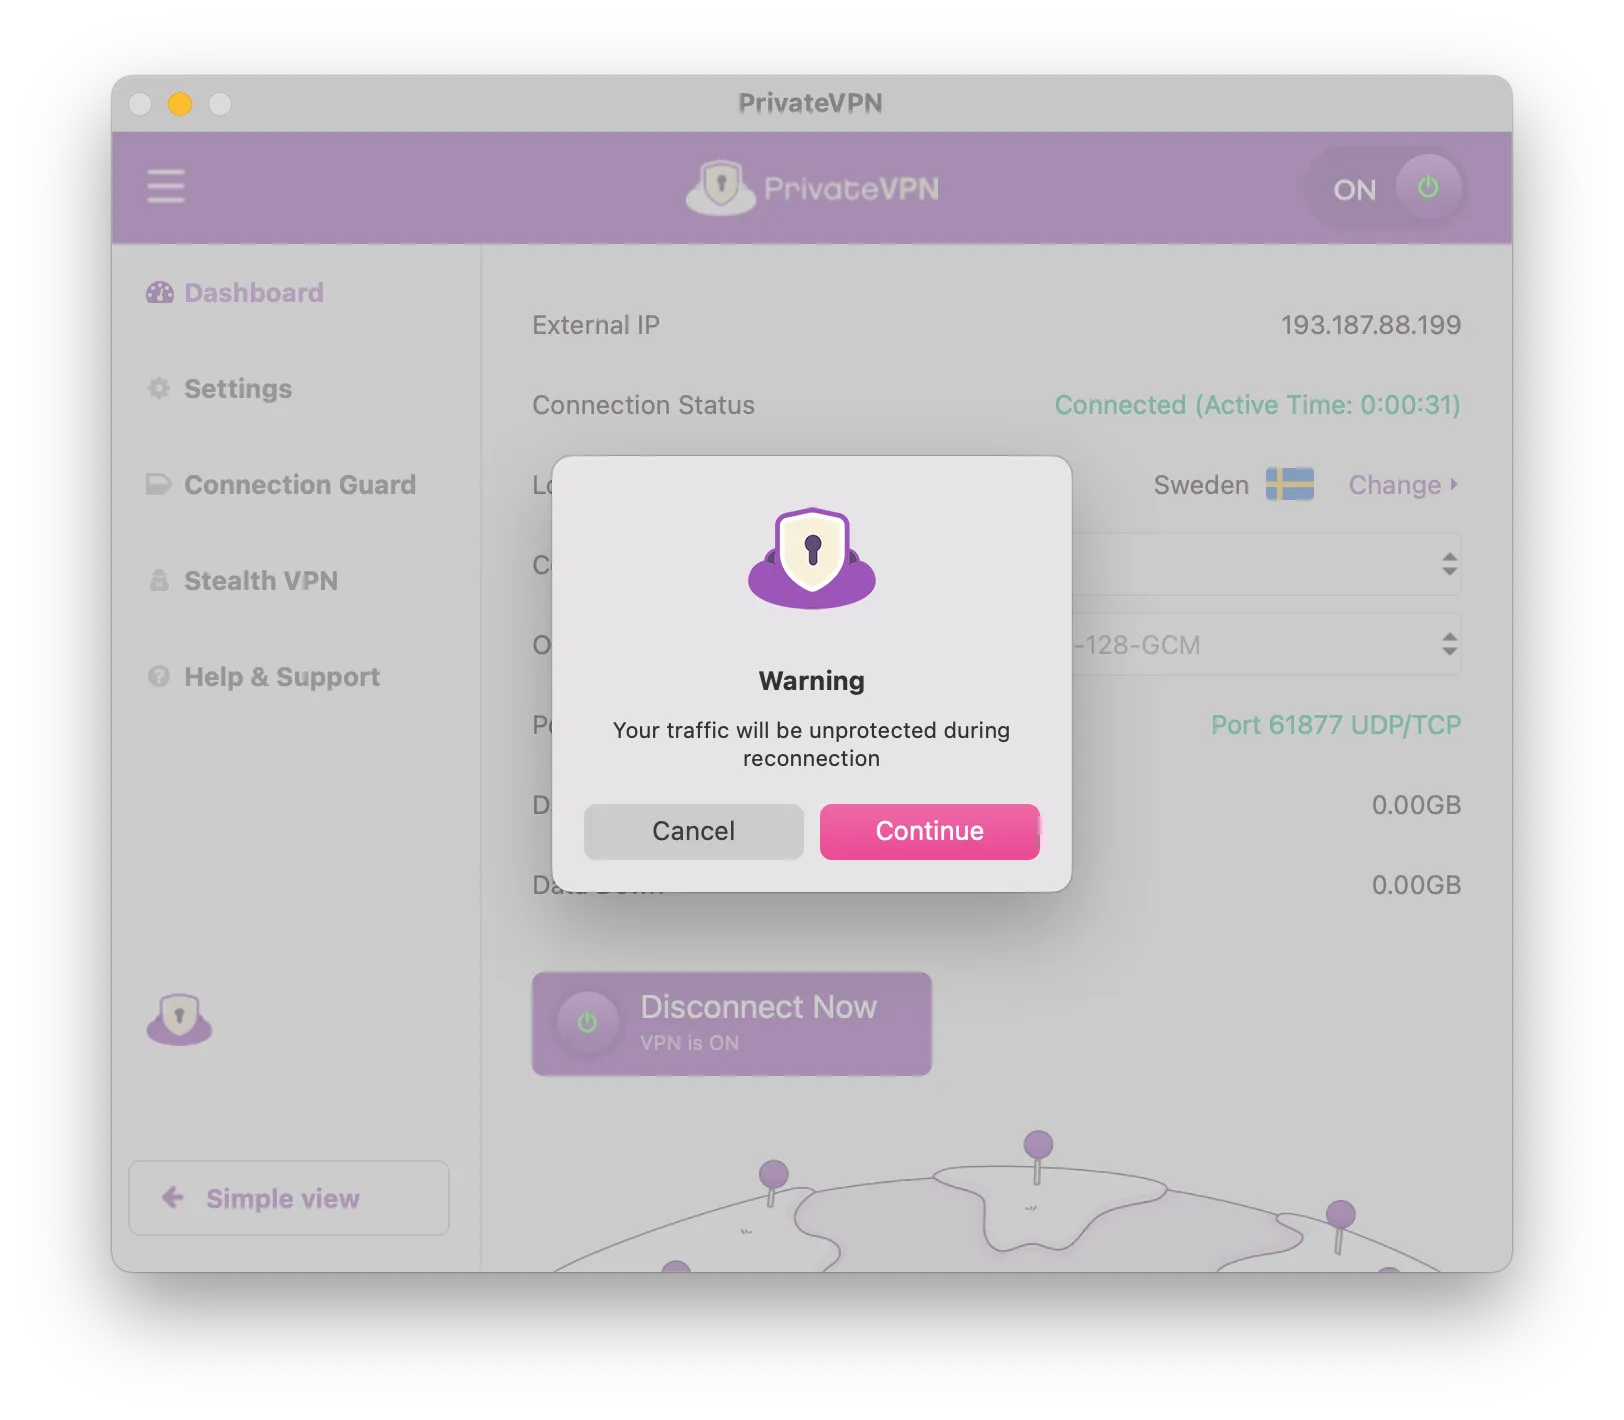 PrivateVPN app on macOS warning users about IP leaks